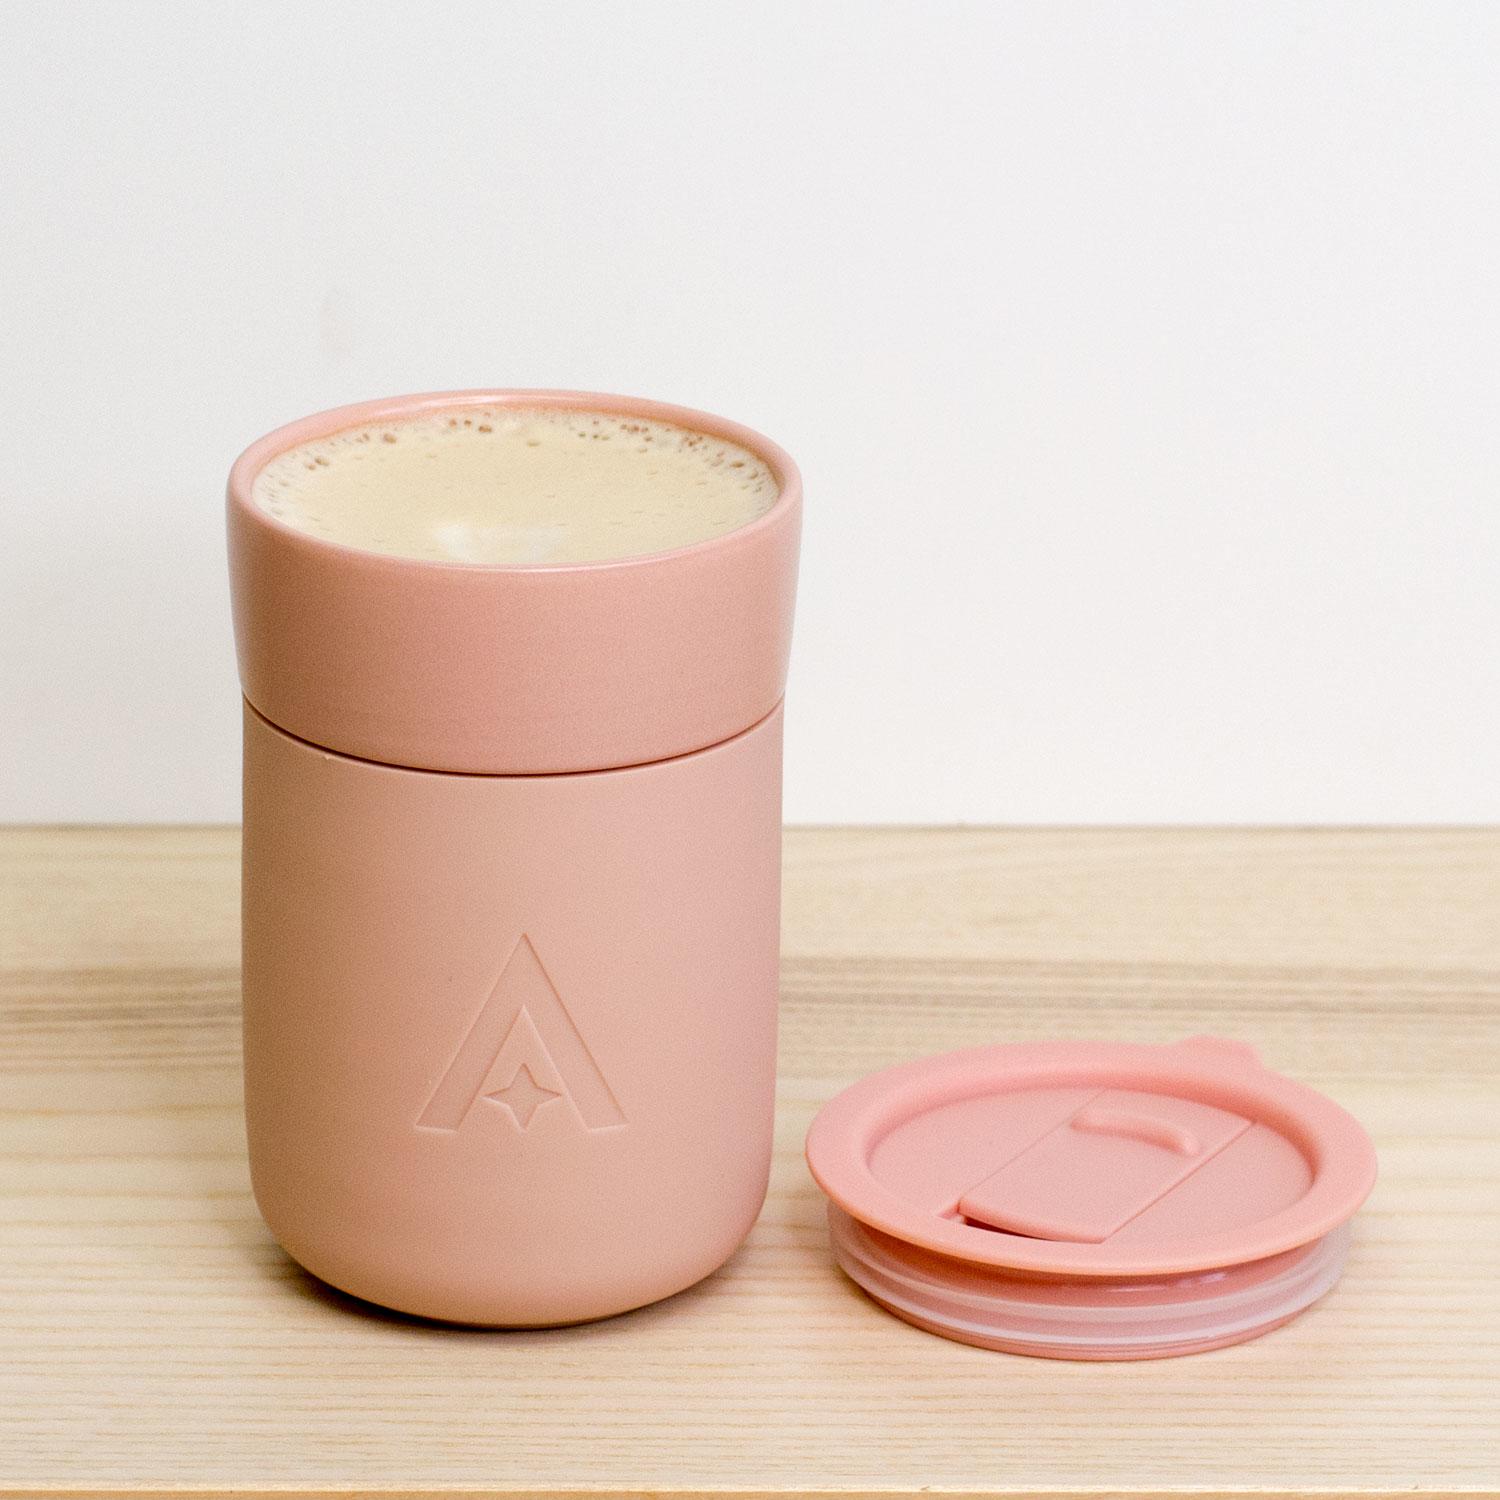 Carry Cup - The universal mug for use at home or on the move (Blush Pink)